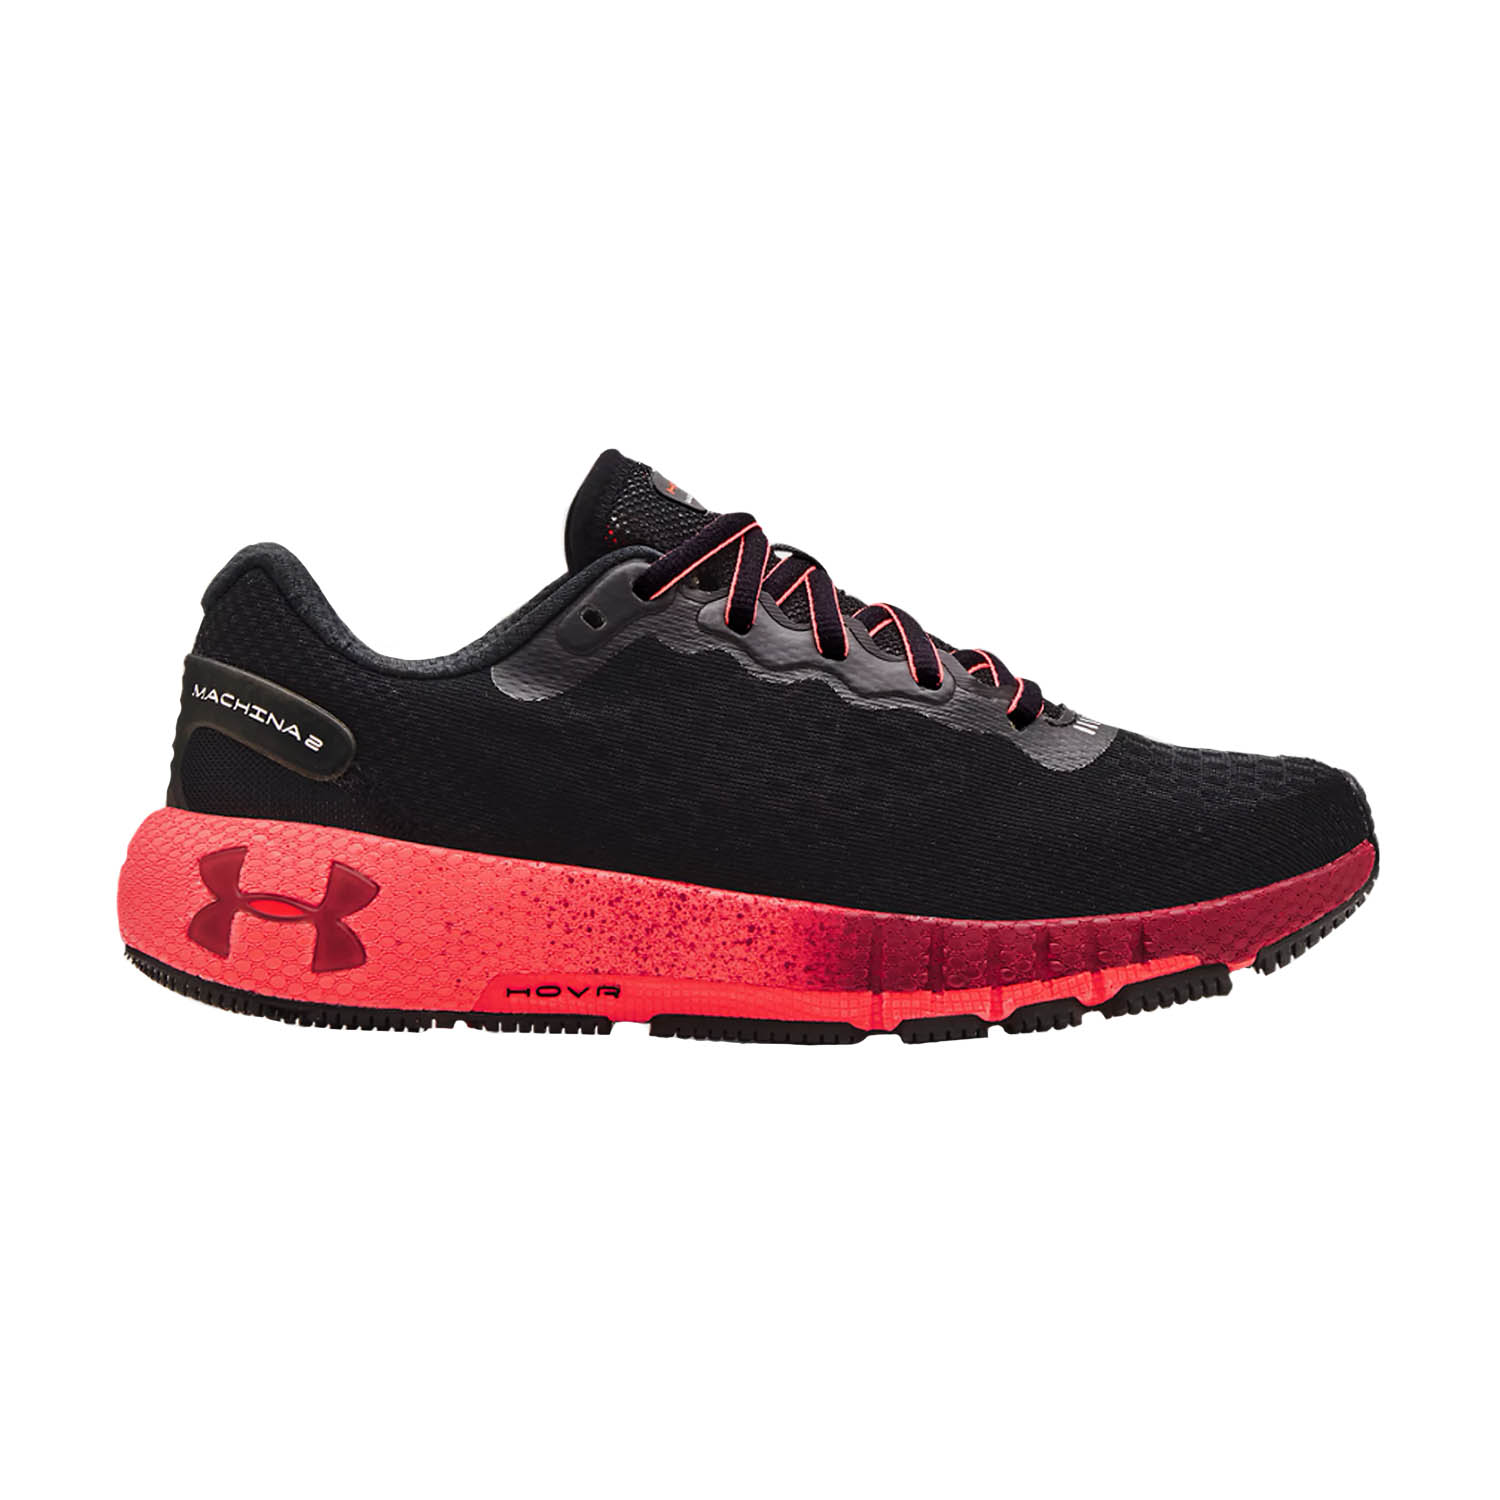 Under Armour HOVR Machina 2 Men's Running Shoes - Black/Beta Red